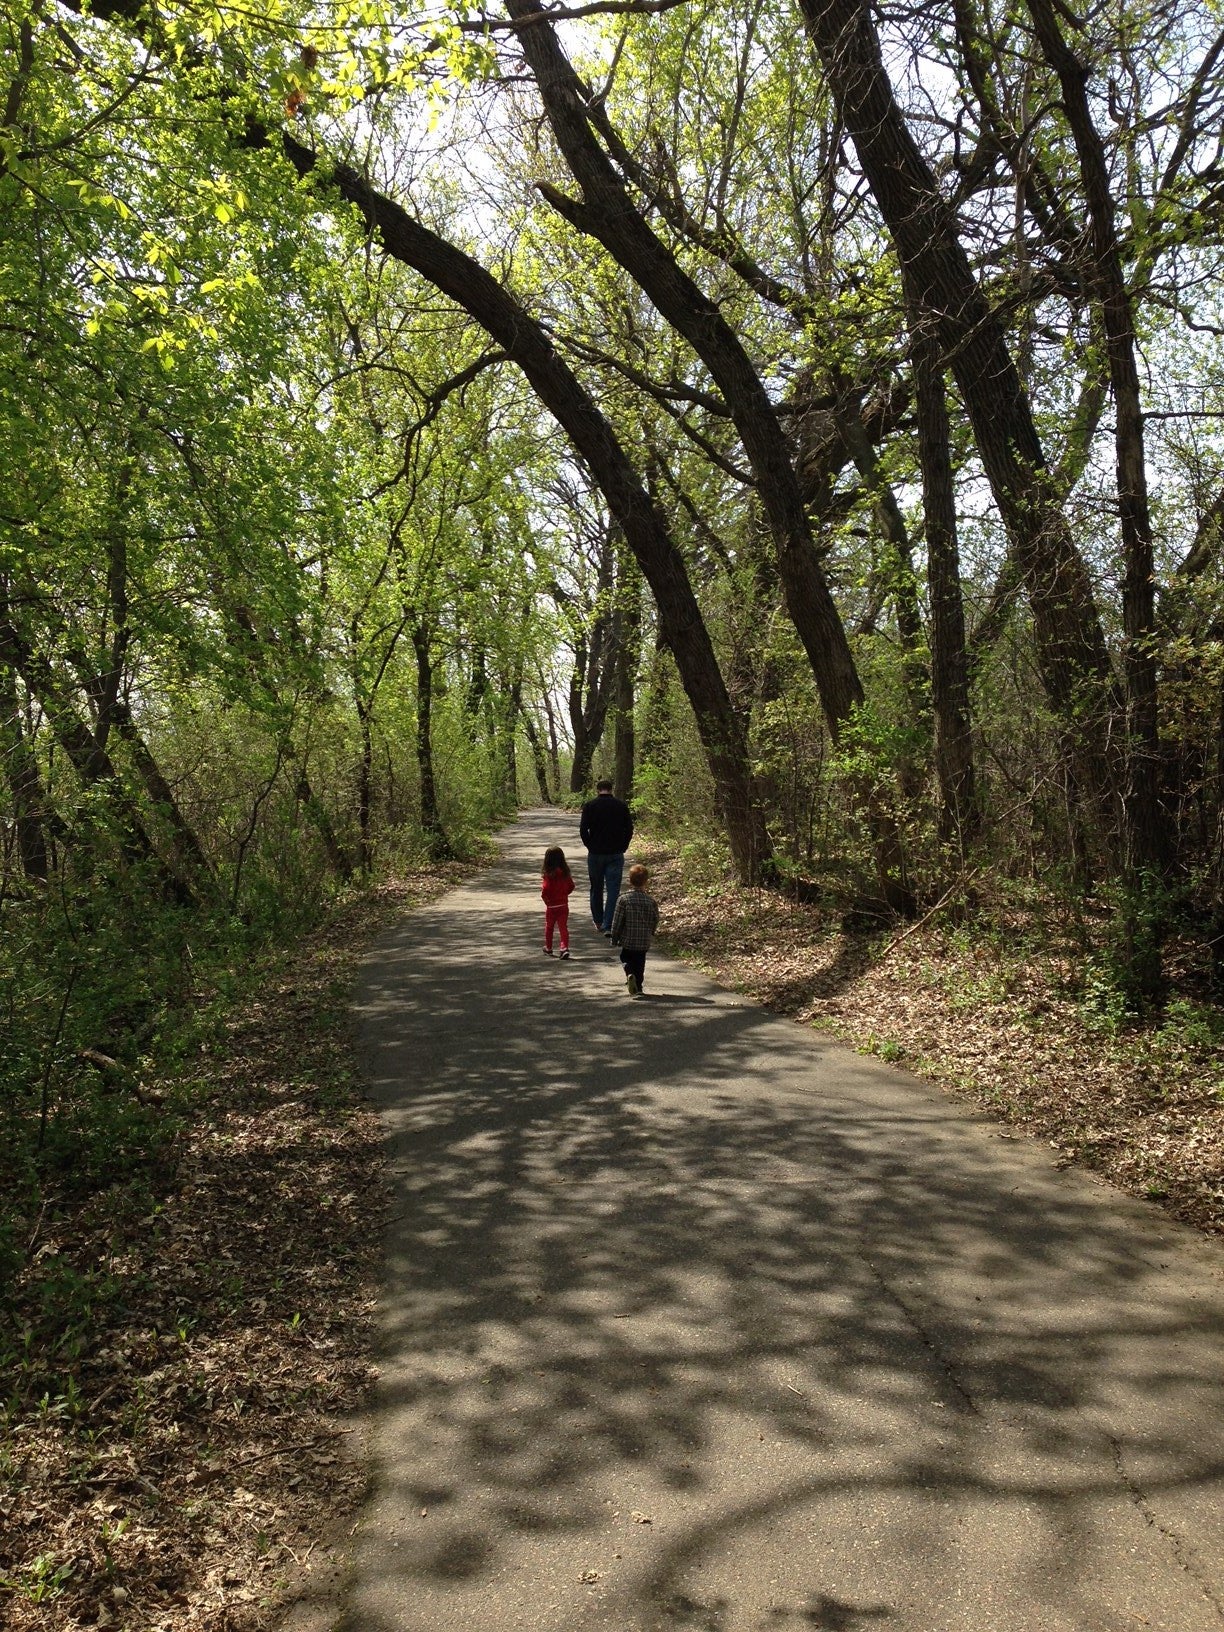 paved trails surround the park, including this one by the lake